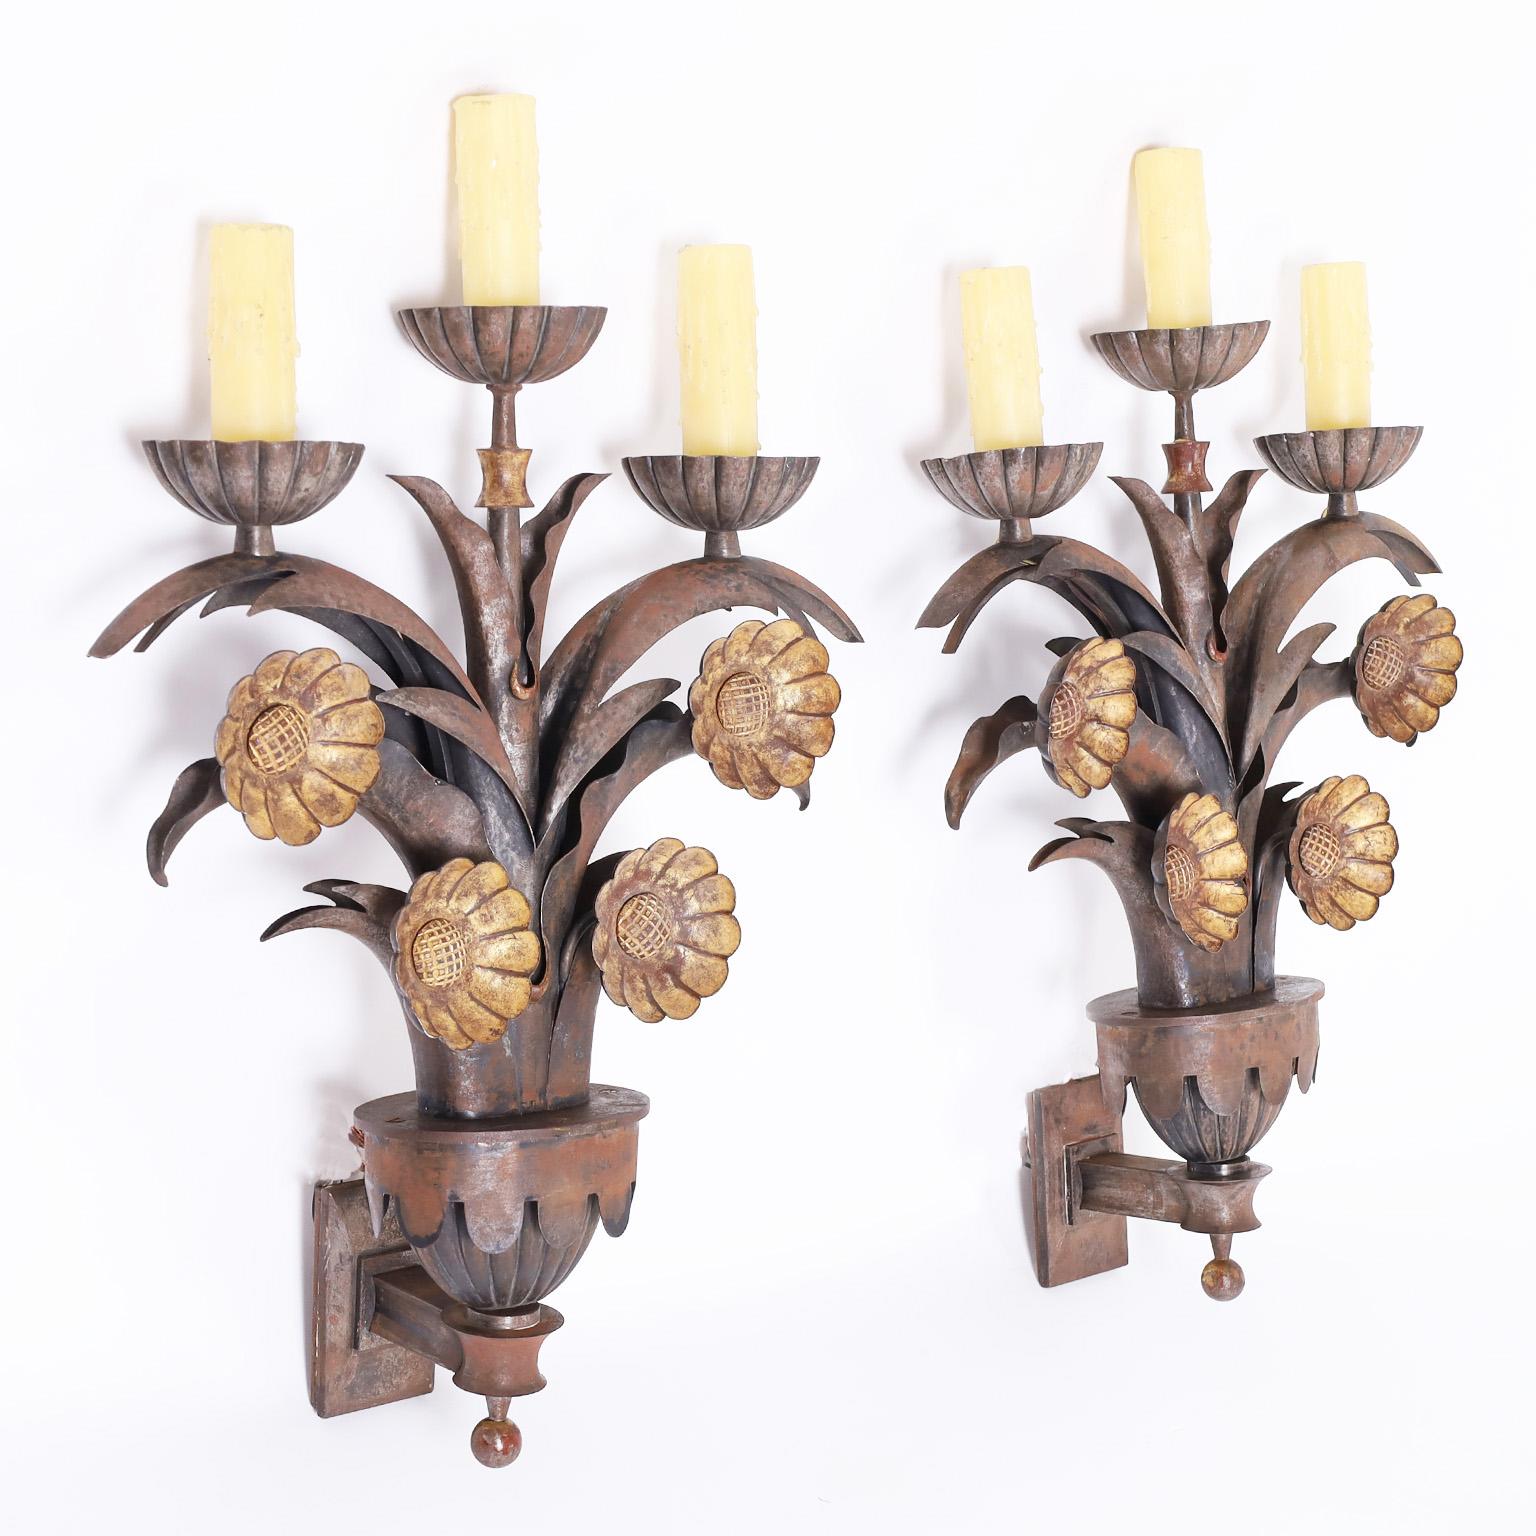 Pair of French three light wall sconces crafted in steel and iron in a floral motif exploring early art deco influences mixed with industrial architecture, probably designed for a specific building.